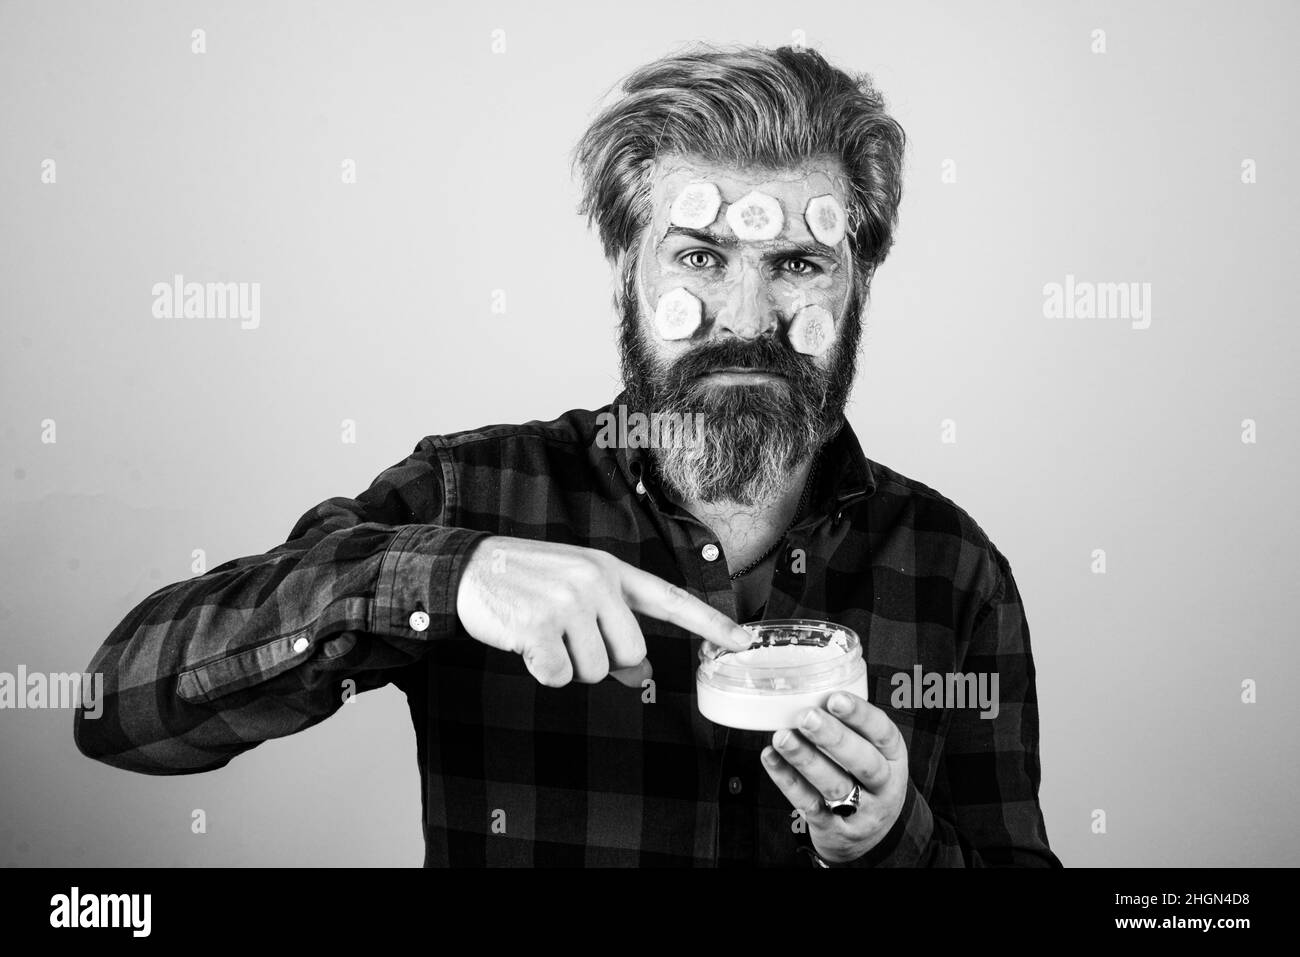 Spa man Black and White Stock Photos & Images - Alamy